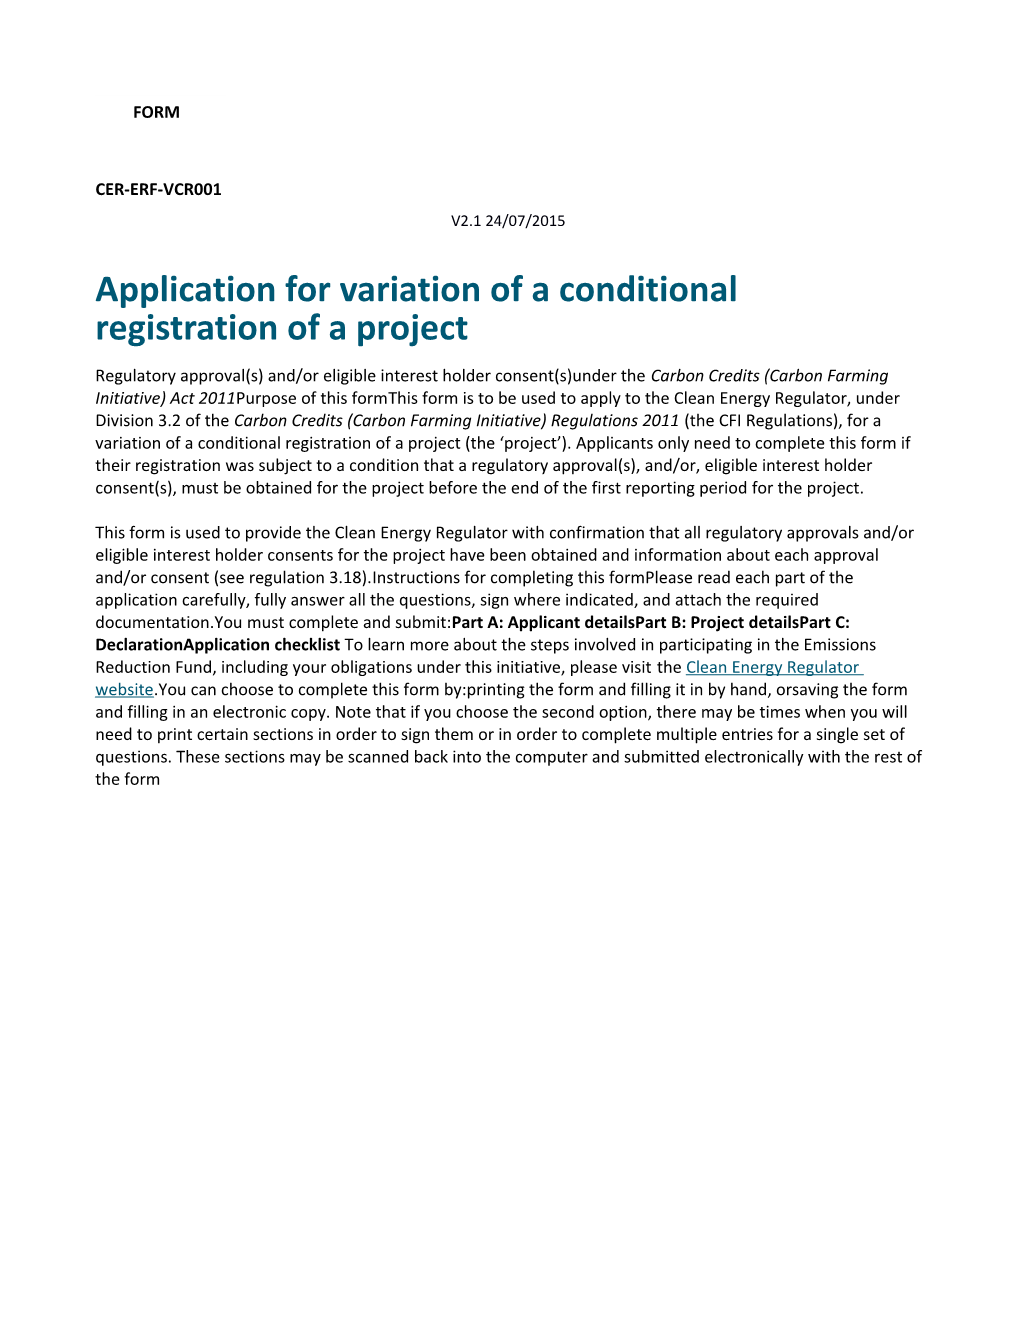 Application for Variation of a Conditional Registration of a Project